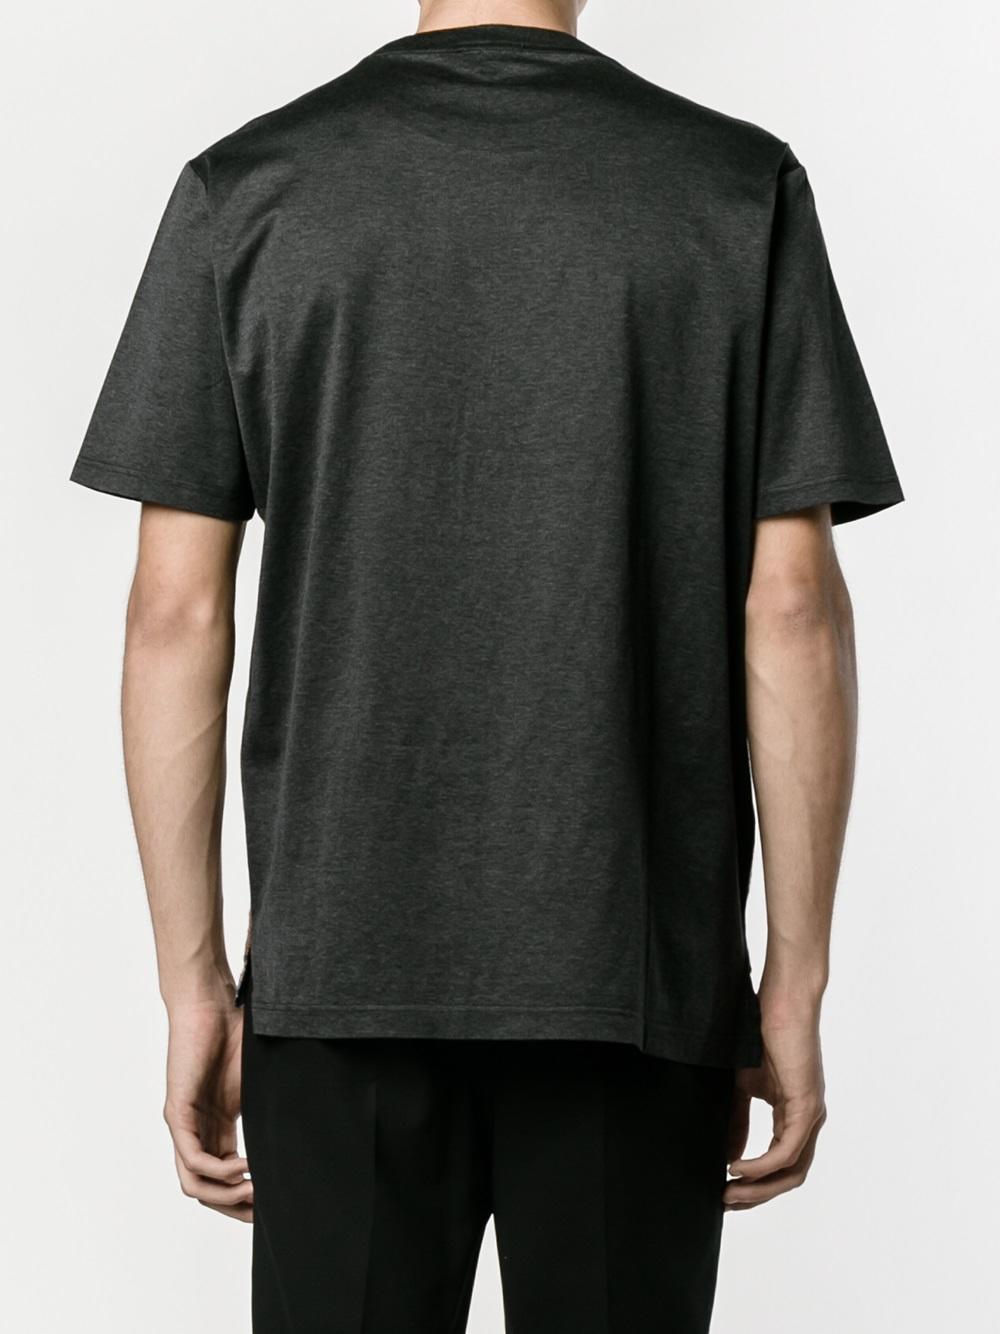 Lyst - Lanvin Checked T-shirt in Gray for Men